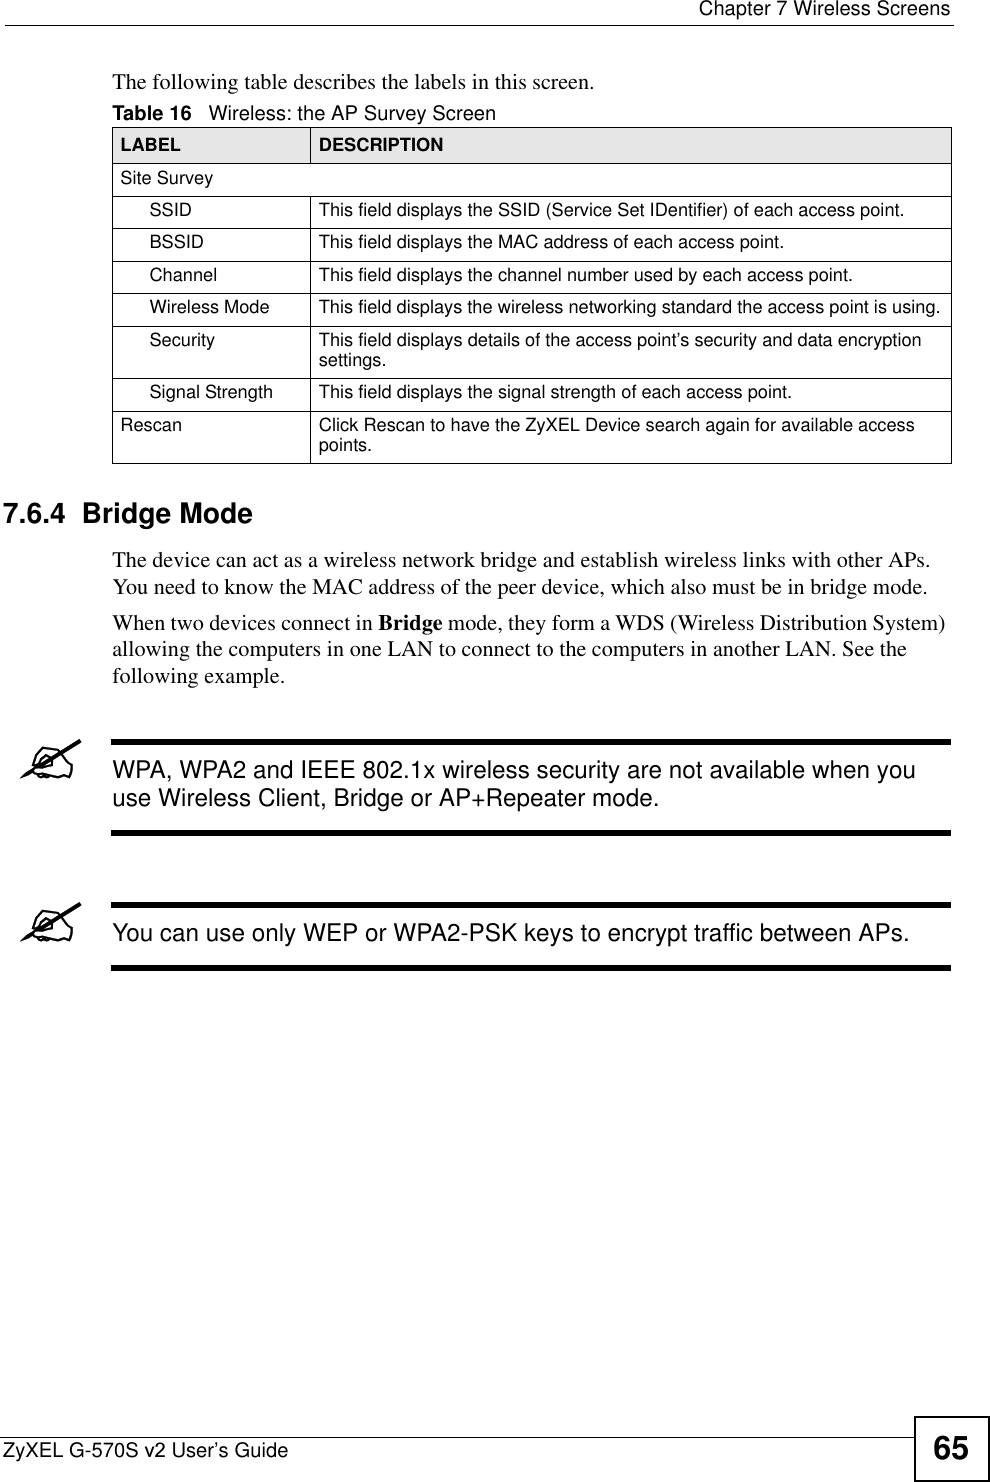  Chapter 7 Wireless ScreensZyXEL G-570S v2 User’s Guide 65The following table describes the labels in this screen.7.6.4  Bridge Mode The device can act as a wireless network bridge and establish wireless links with other APs. You need to know the MAC address of the peer device, which also must be in bridge mode. When two devices connect in Bridge mode, they form a WDS (Wireless Distribution System) allowing the computers in one LAN to connect to the computers in another LAN. See the following example.&quot;WPA, WPA2 and IEEE 802.1x wireless security are not available when you use Wireless Client, Bridge or AP+Repeater mode. &quot;You can use only WEP or WPA2-PSK keys to encrypt traffic between APs.Table 16   Wireless: the AP Survey ScreenLABEL DESCRIPTIONSite SurveySSID This field displays the SSID (Service Set IDentifier) of each access point. BSSID This field displays the MAC address of each access point.Channel This field displays the channel number used by each access point.Wireless Mode This field displays the wireless networking standard the access point is using.Security  This field displays details of the access point’s security and data encryption settings.Signal Strength This field displays the signal strength of each access point.Rescan Click Rescan to have the ZyXEL Device search again for available access points.